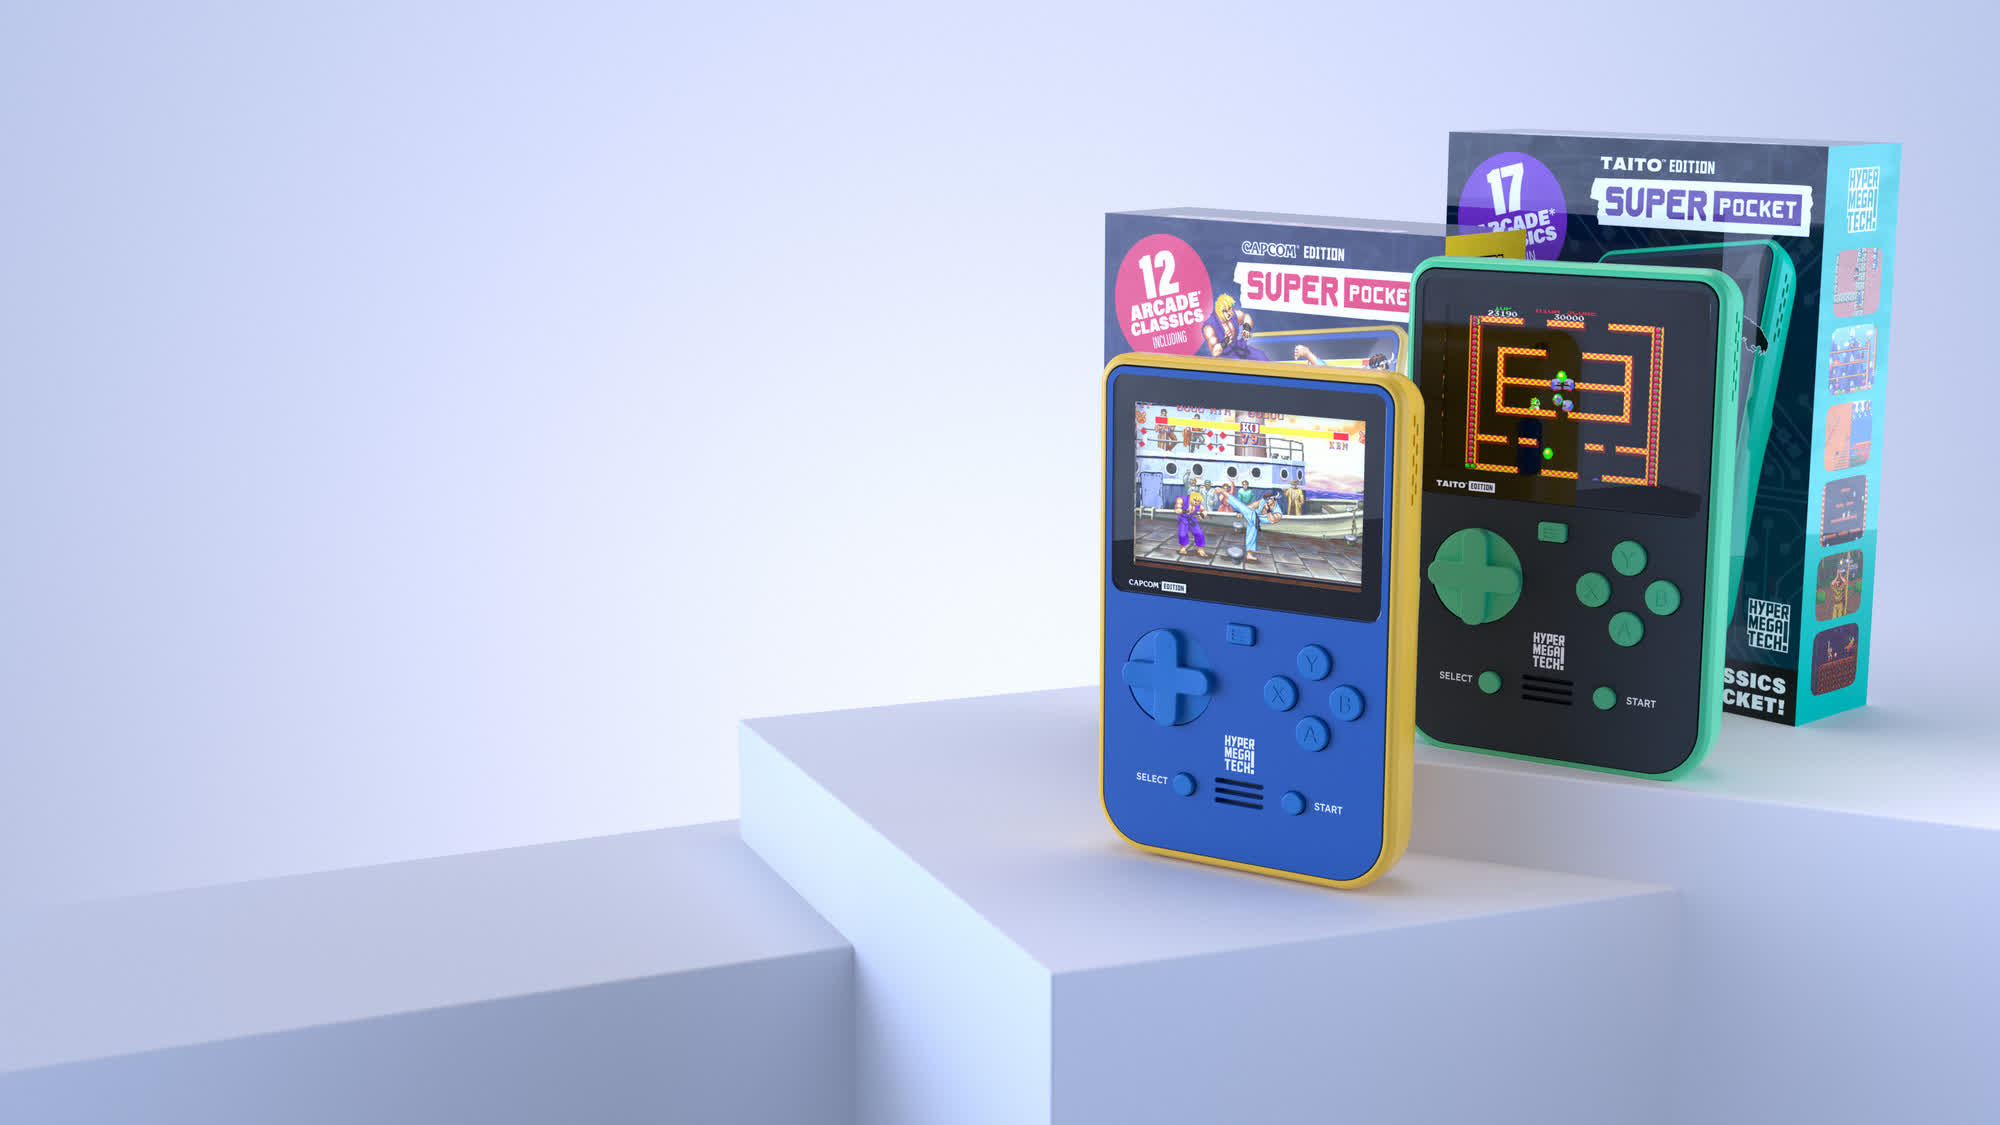 Super Pocket retro handheld comes with built-in games, supports cartridges